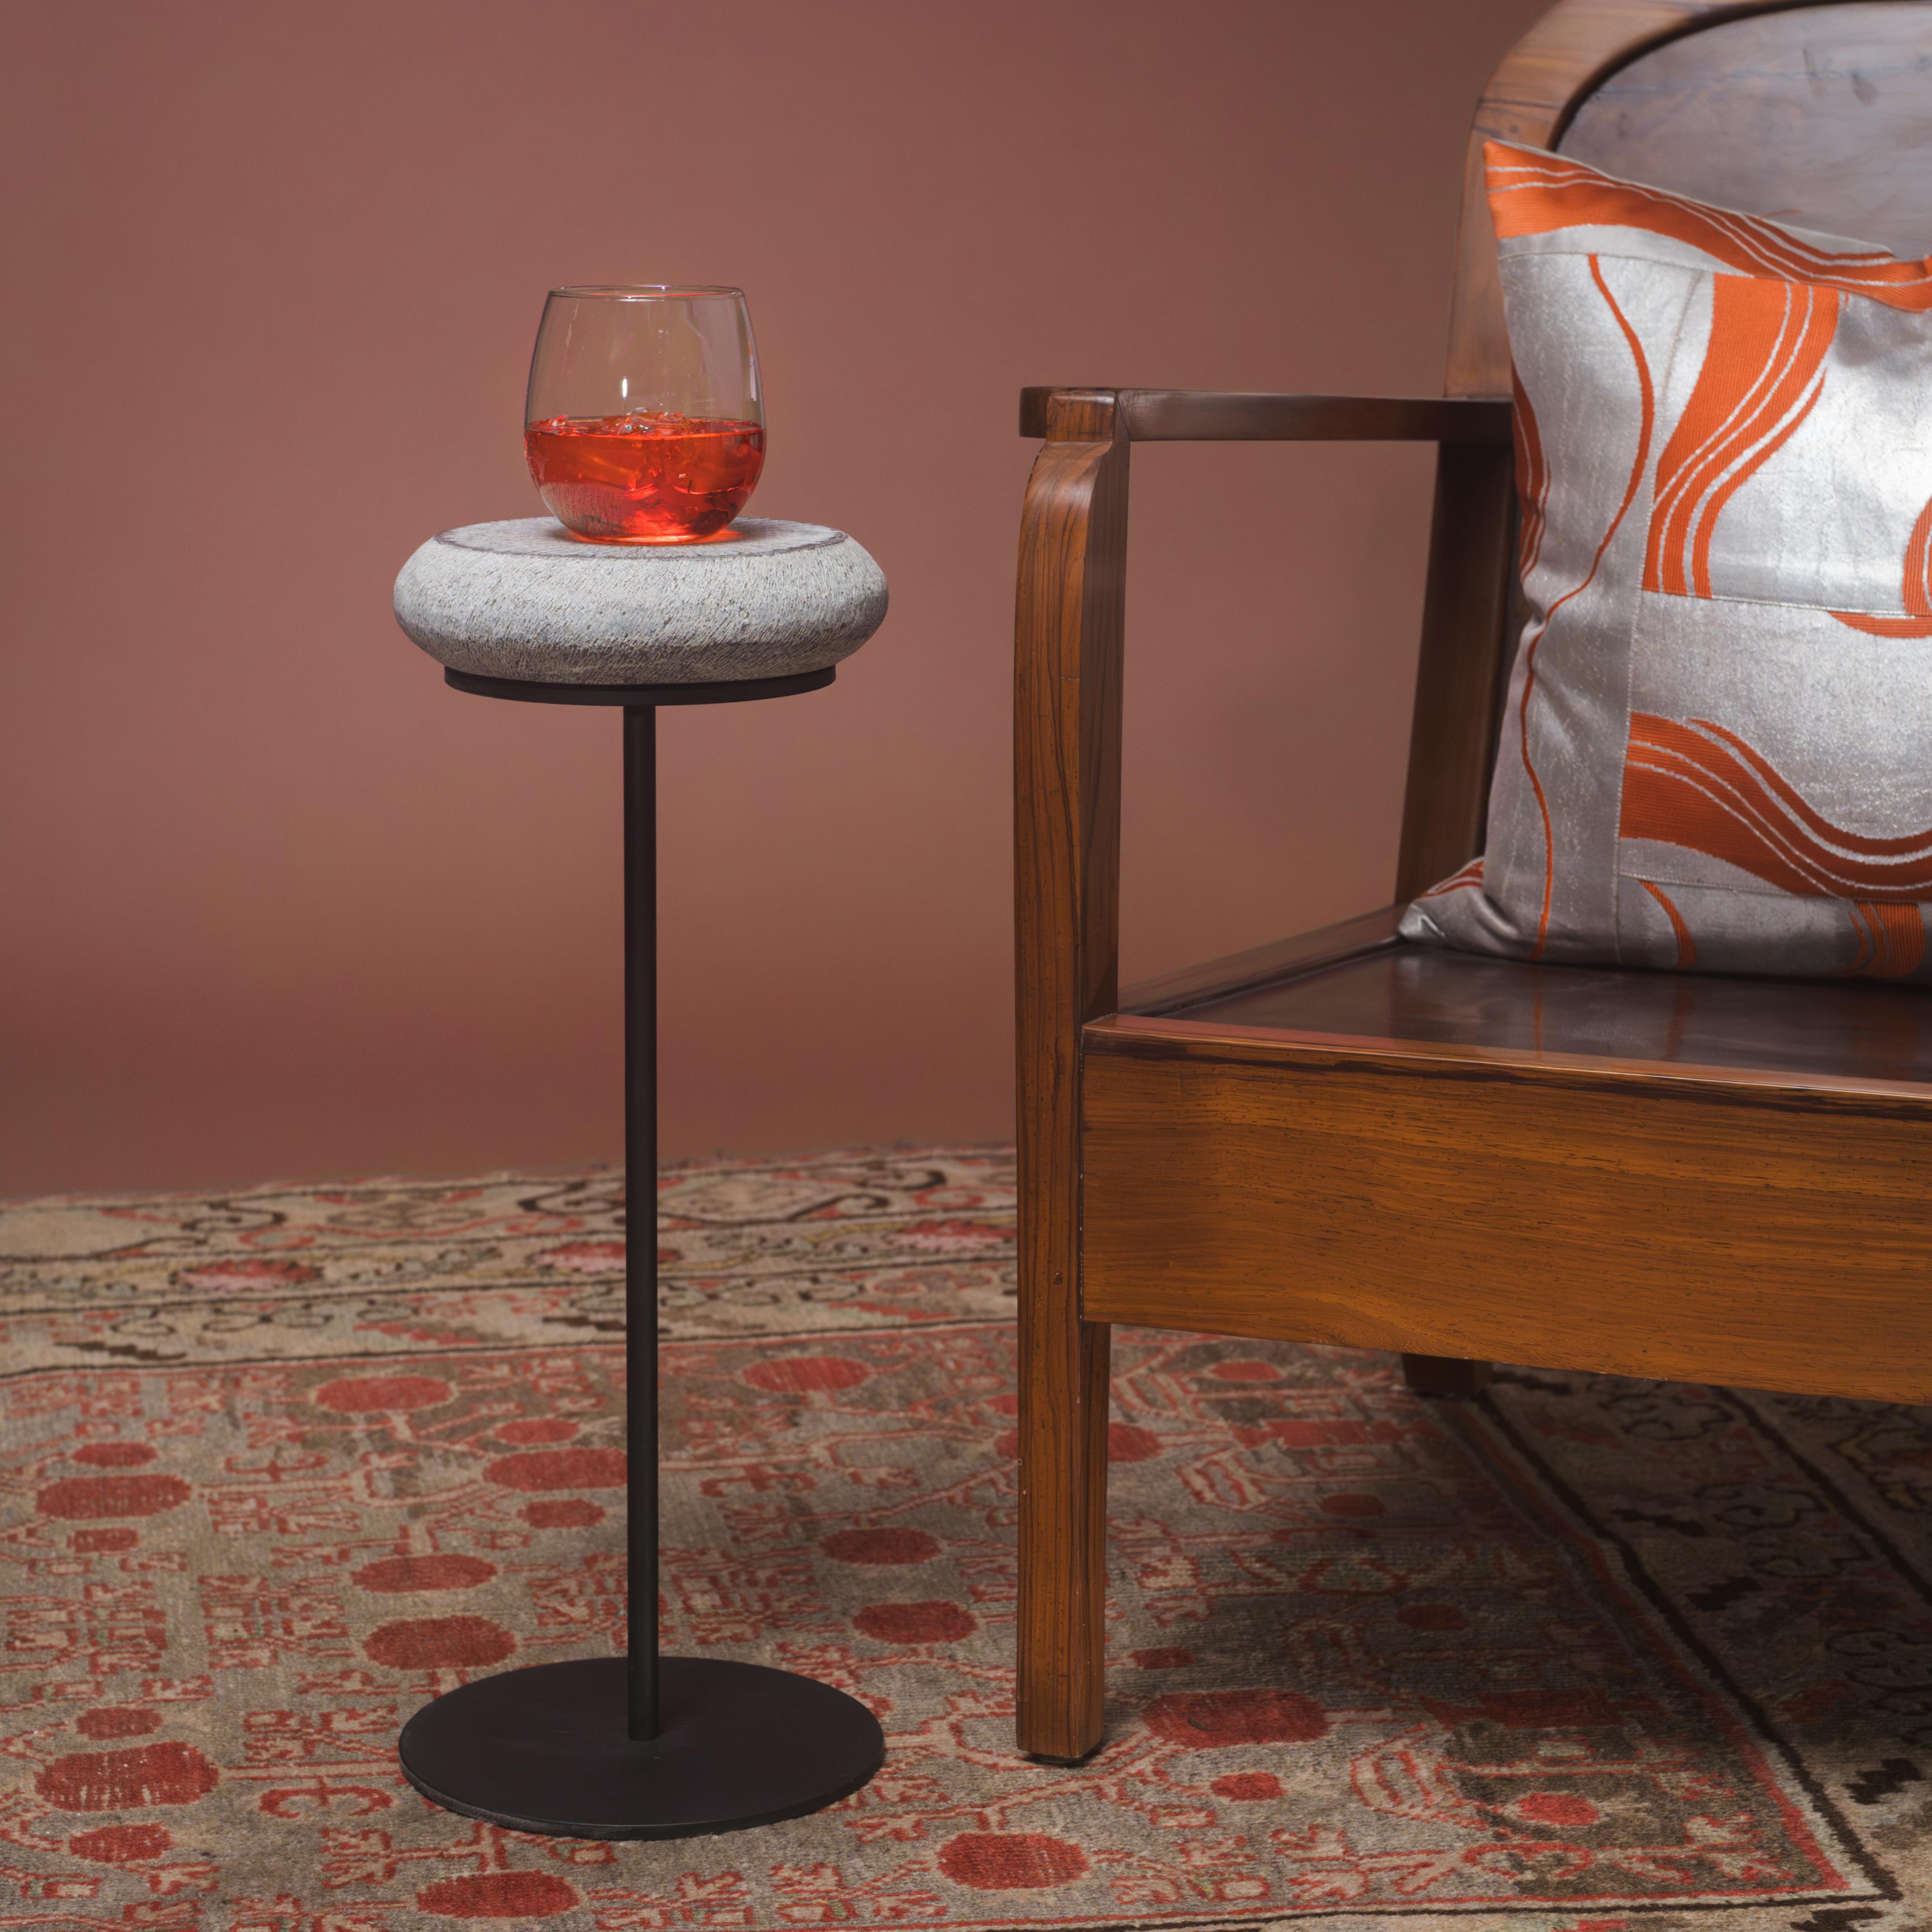 The stone top of this petite side table is carved of solid limestone into the form of a small hand-held drum. The stone drum has a simple, round form with curved sides and a textured surface. Placed atop a matte steel pedestal base, this small